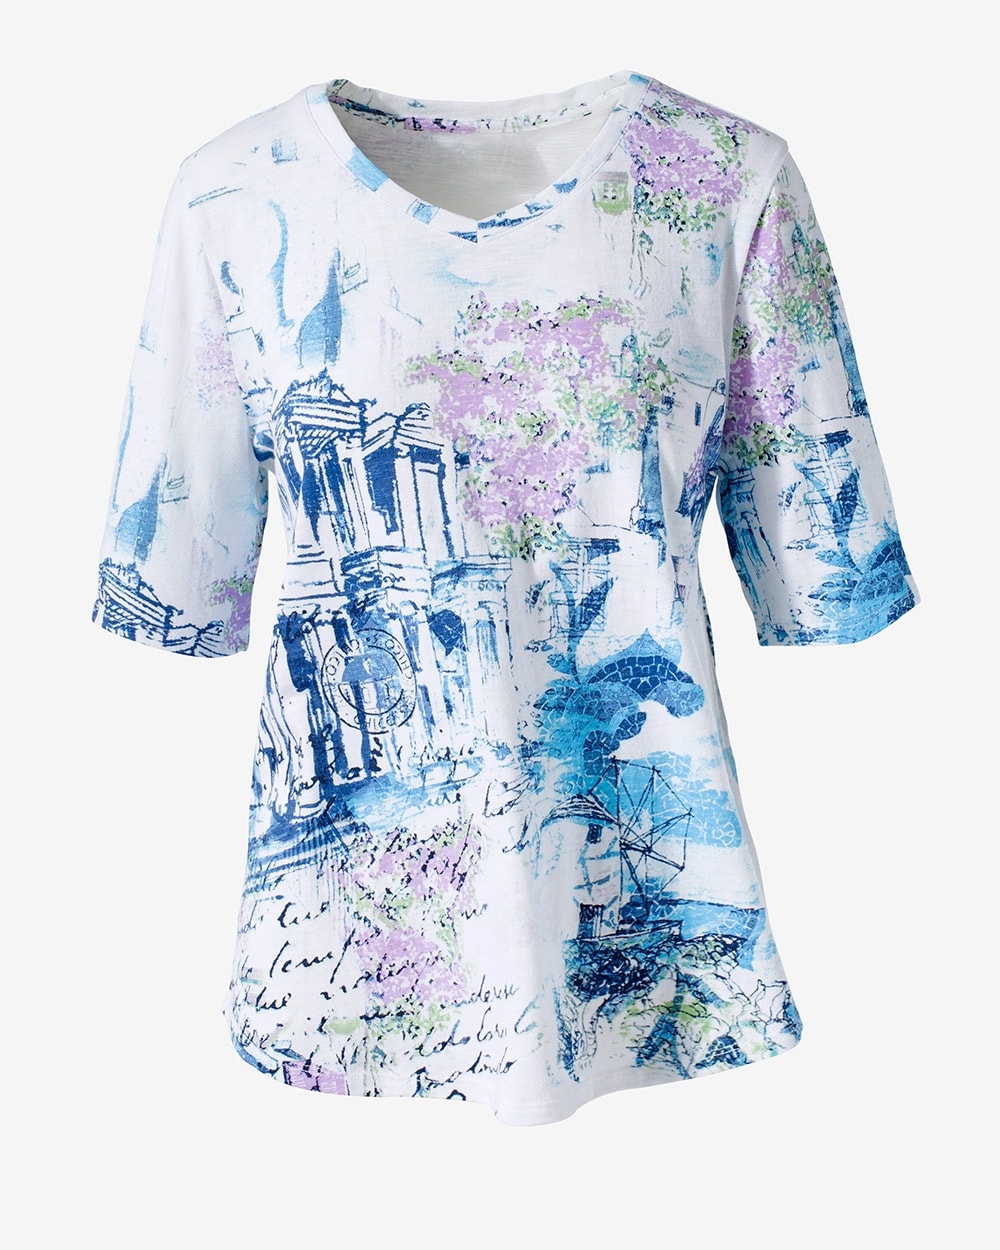 Weekends Printed Travels Soft V-Neck Tee